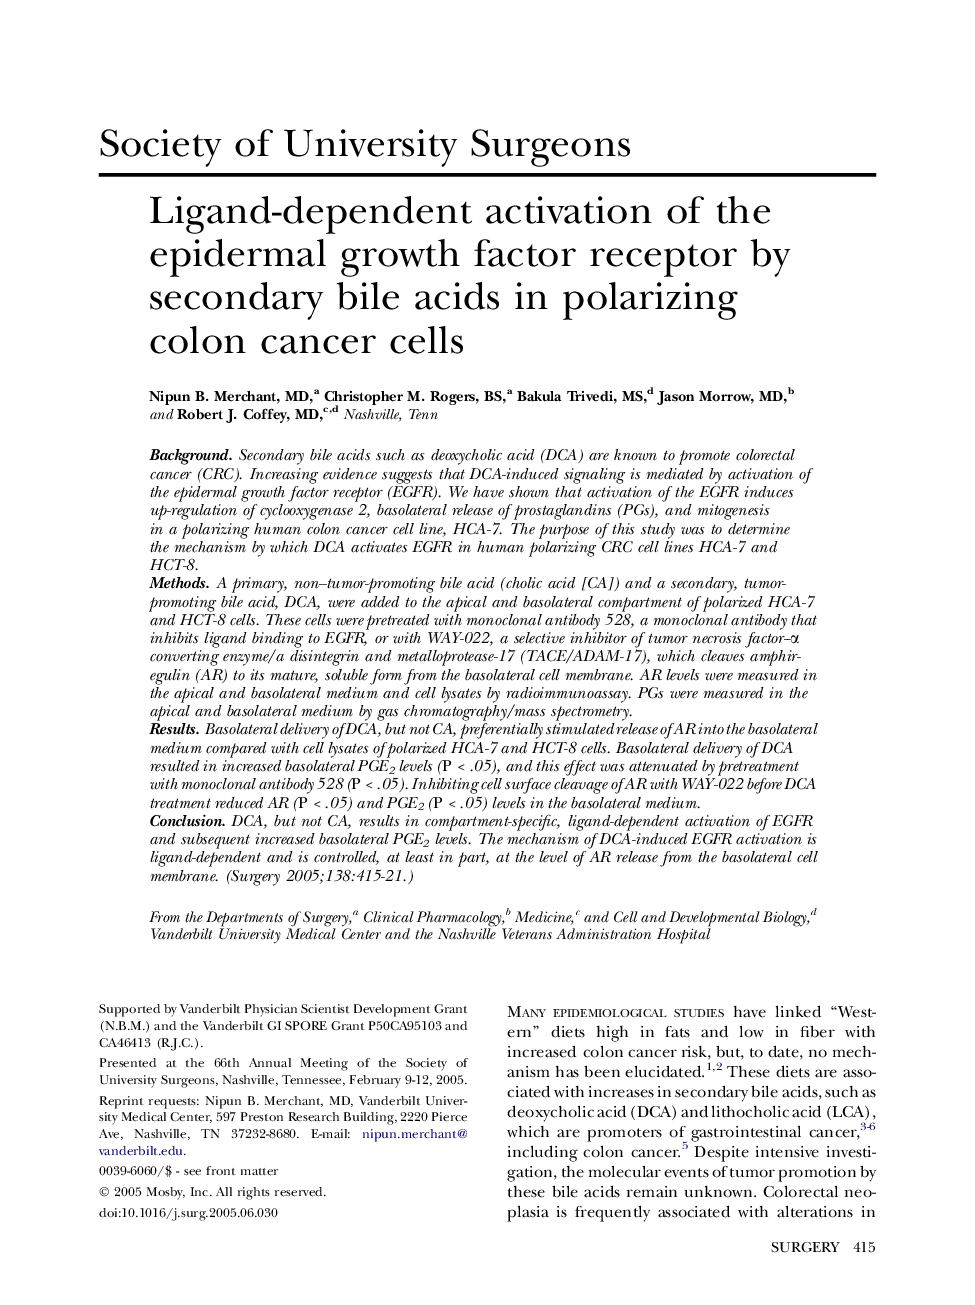 Ligand-dependent activation of the epidermal growth factor receptor by secondary bile acids in polarizing colon cancer cells